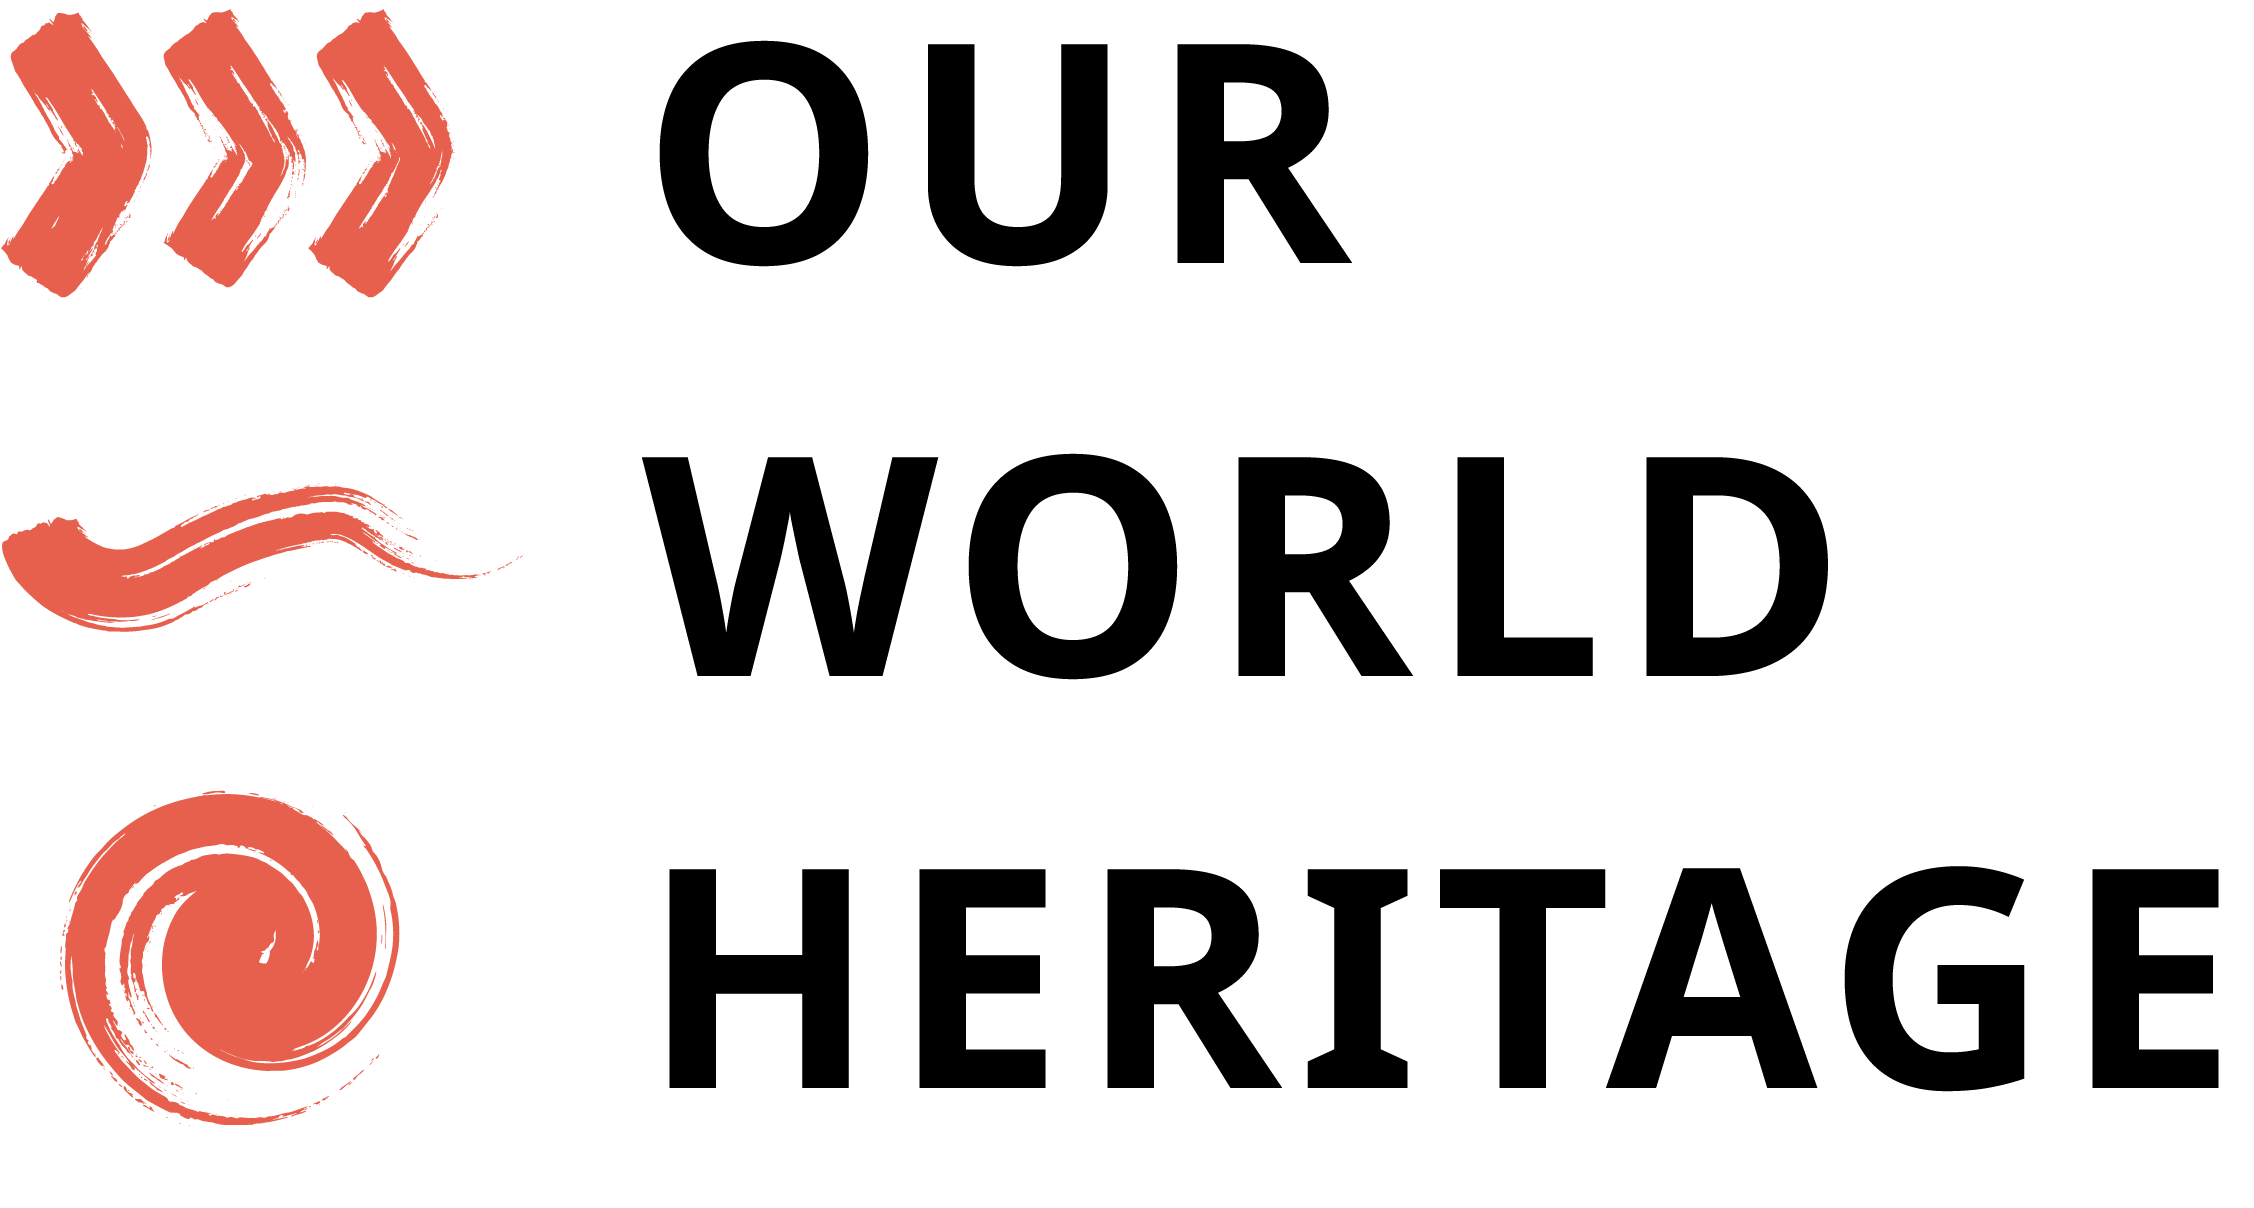 Our World Heritage